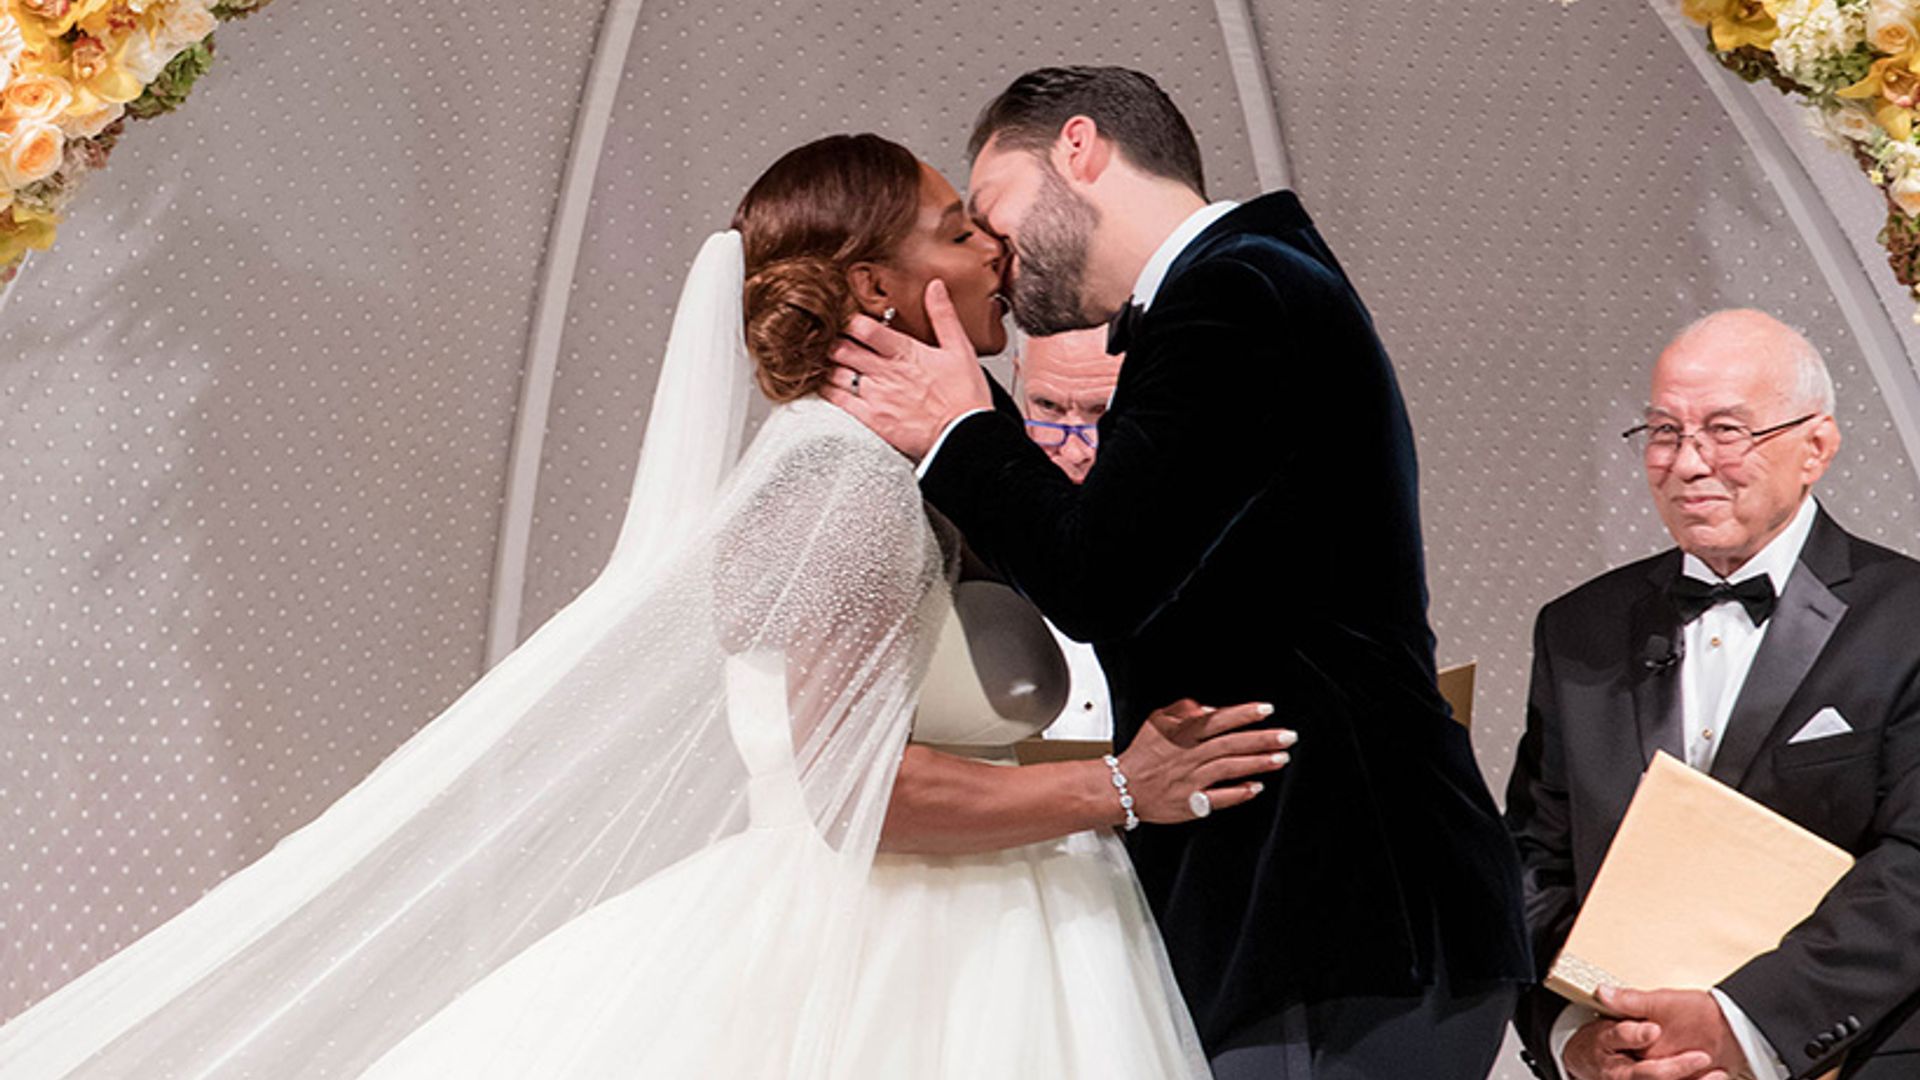 Serena Williams and Alexis Ohanian marry: see stunning wedding pictures